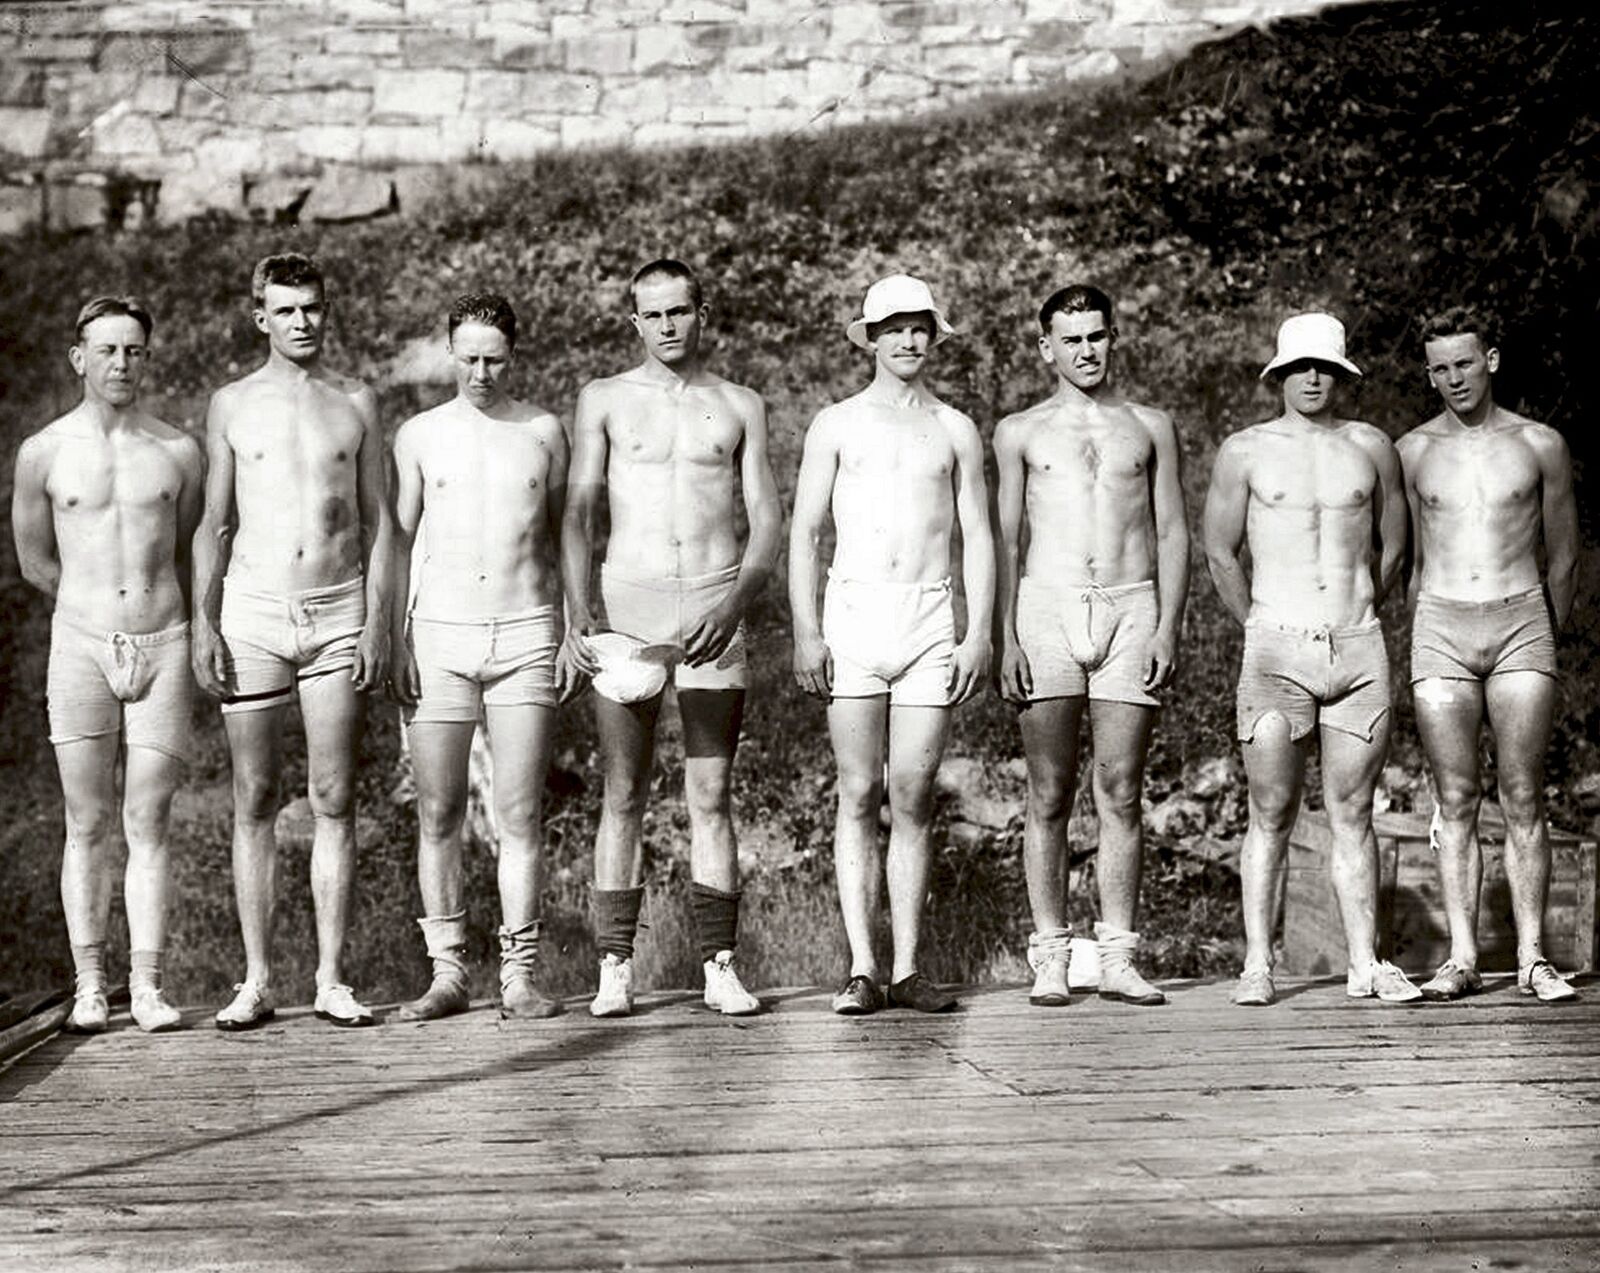 1914 YALE CREW TEAM PHOTO  Rowing  (172-a)